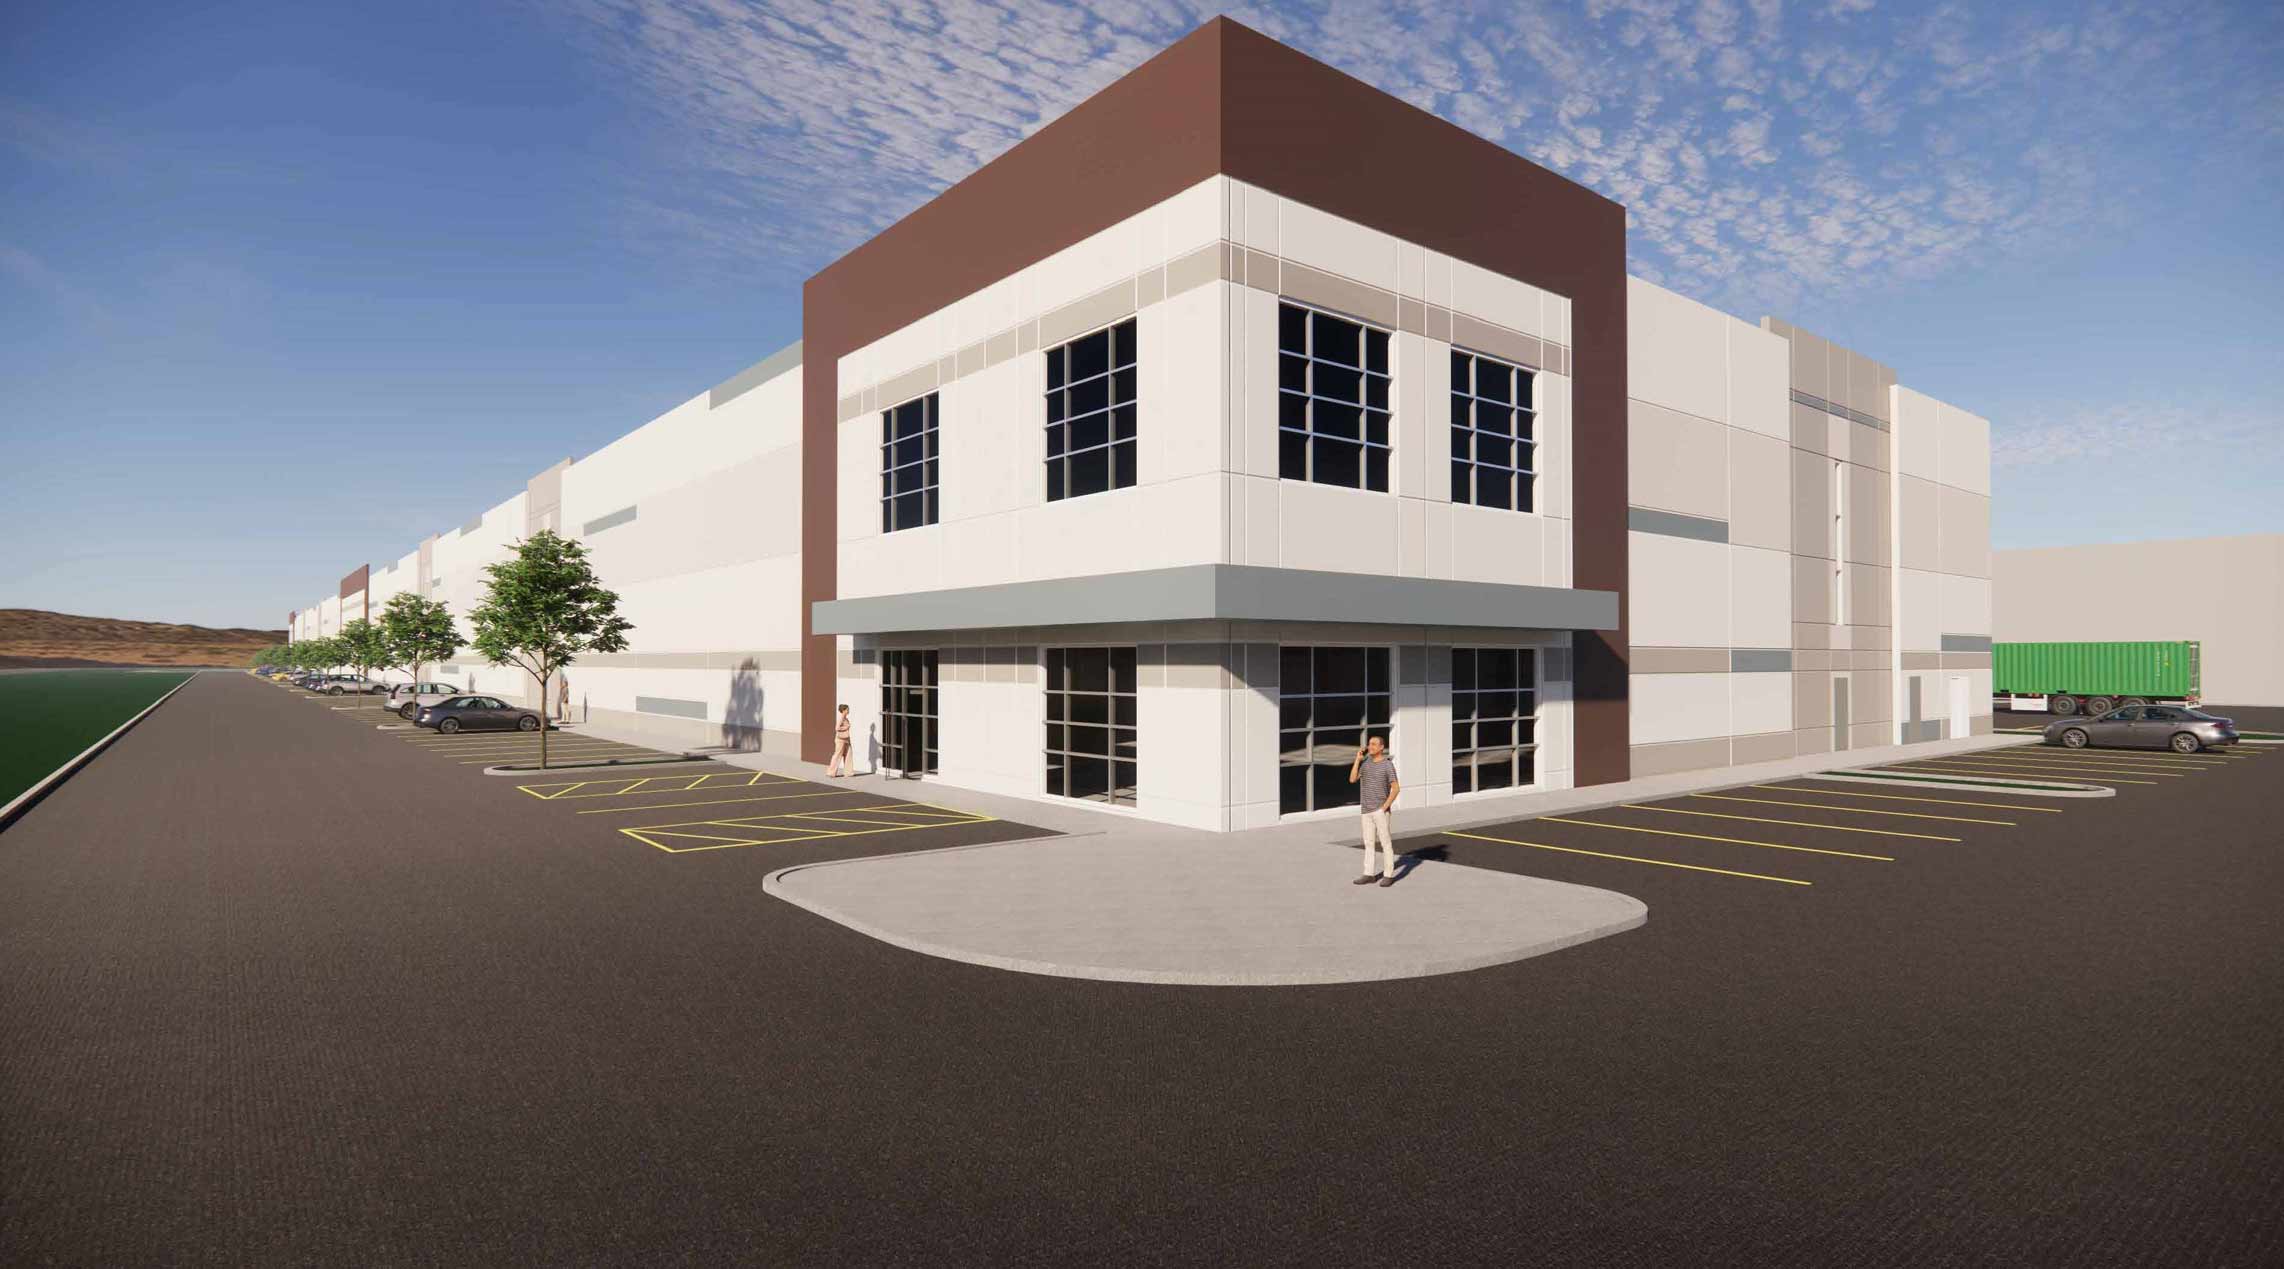 Construction starts on final phase of a 3-building West Valley industrial development